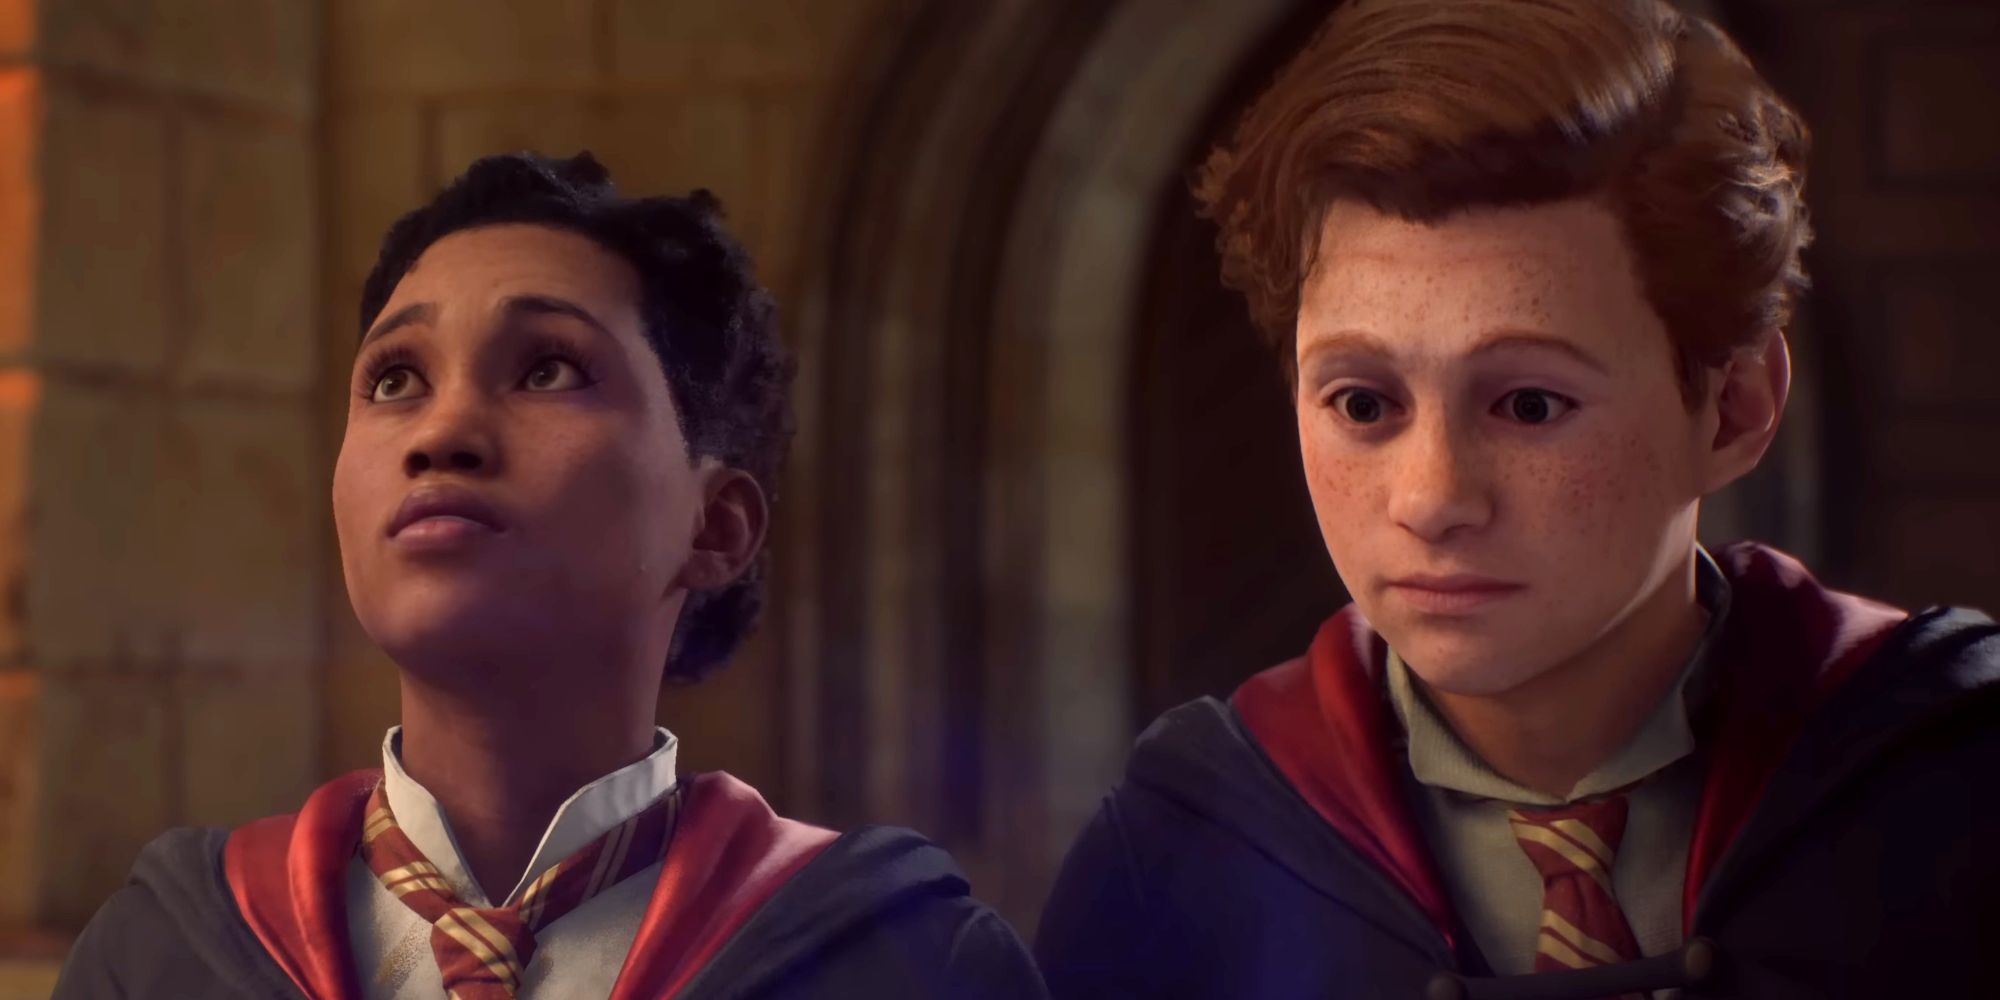 Two Hogwarts Legacy students in the school's Great Hall wearing Gryffindor uniforms. One is looking down at the table, while the other looks up at an owl flying overhead.